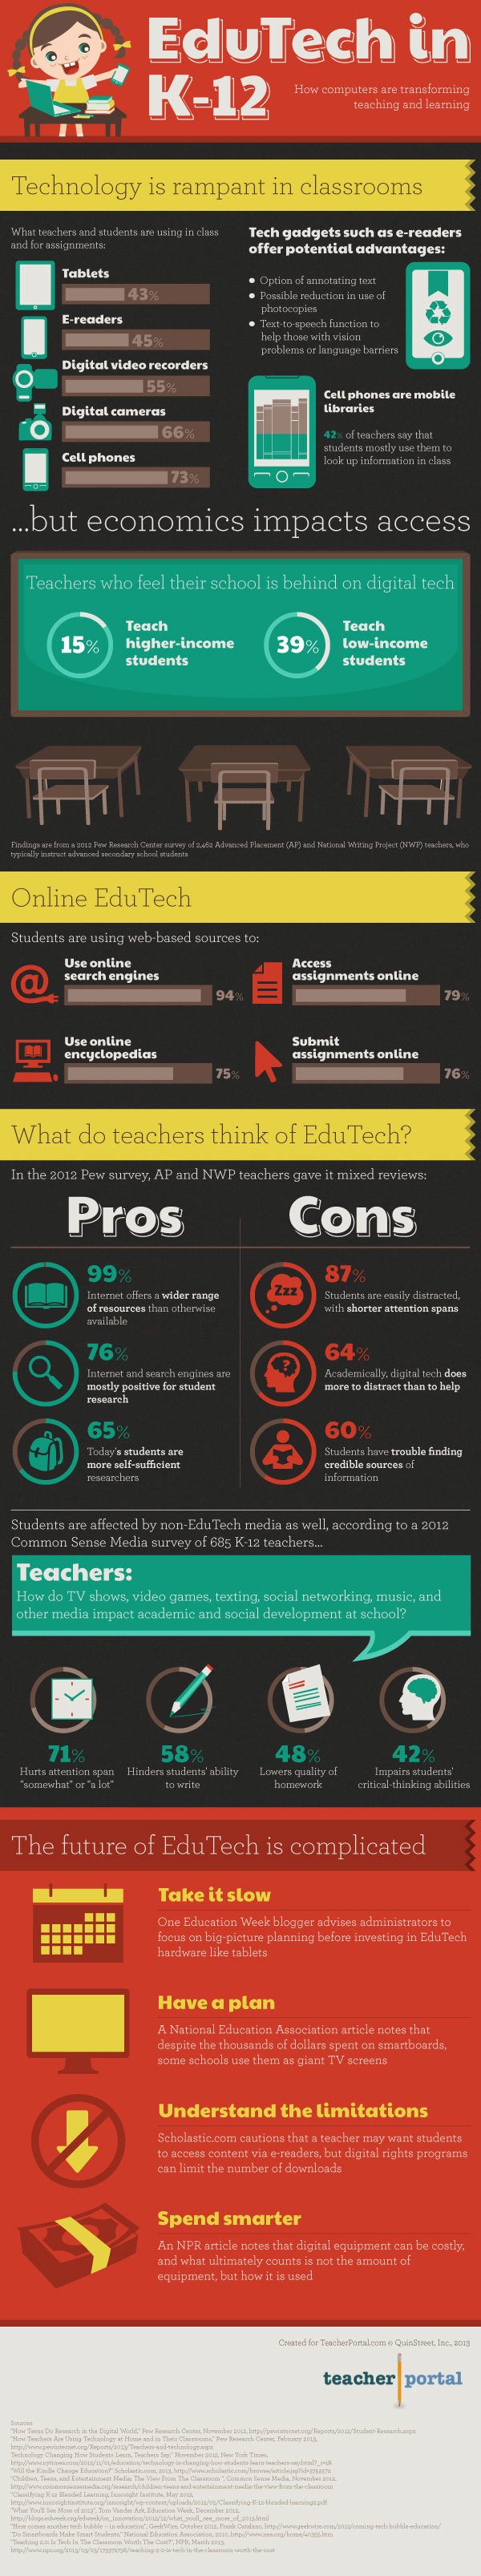 The Rise of EduTech in K-12 Classrooms Infographic